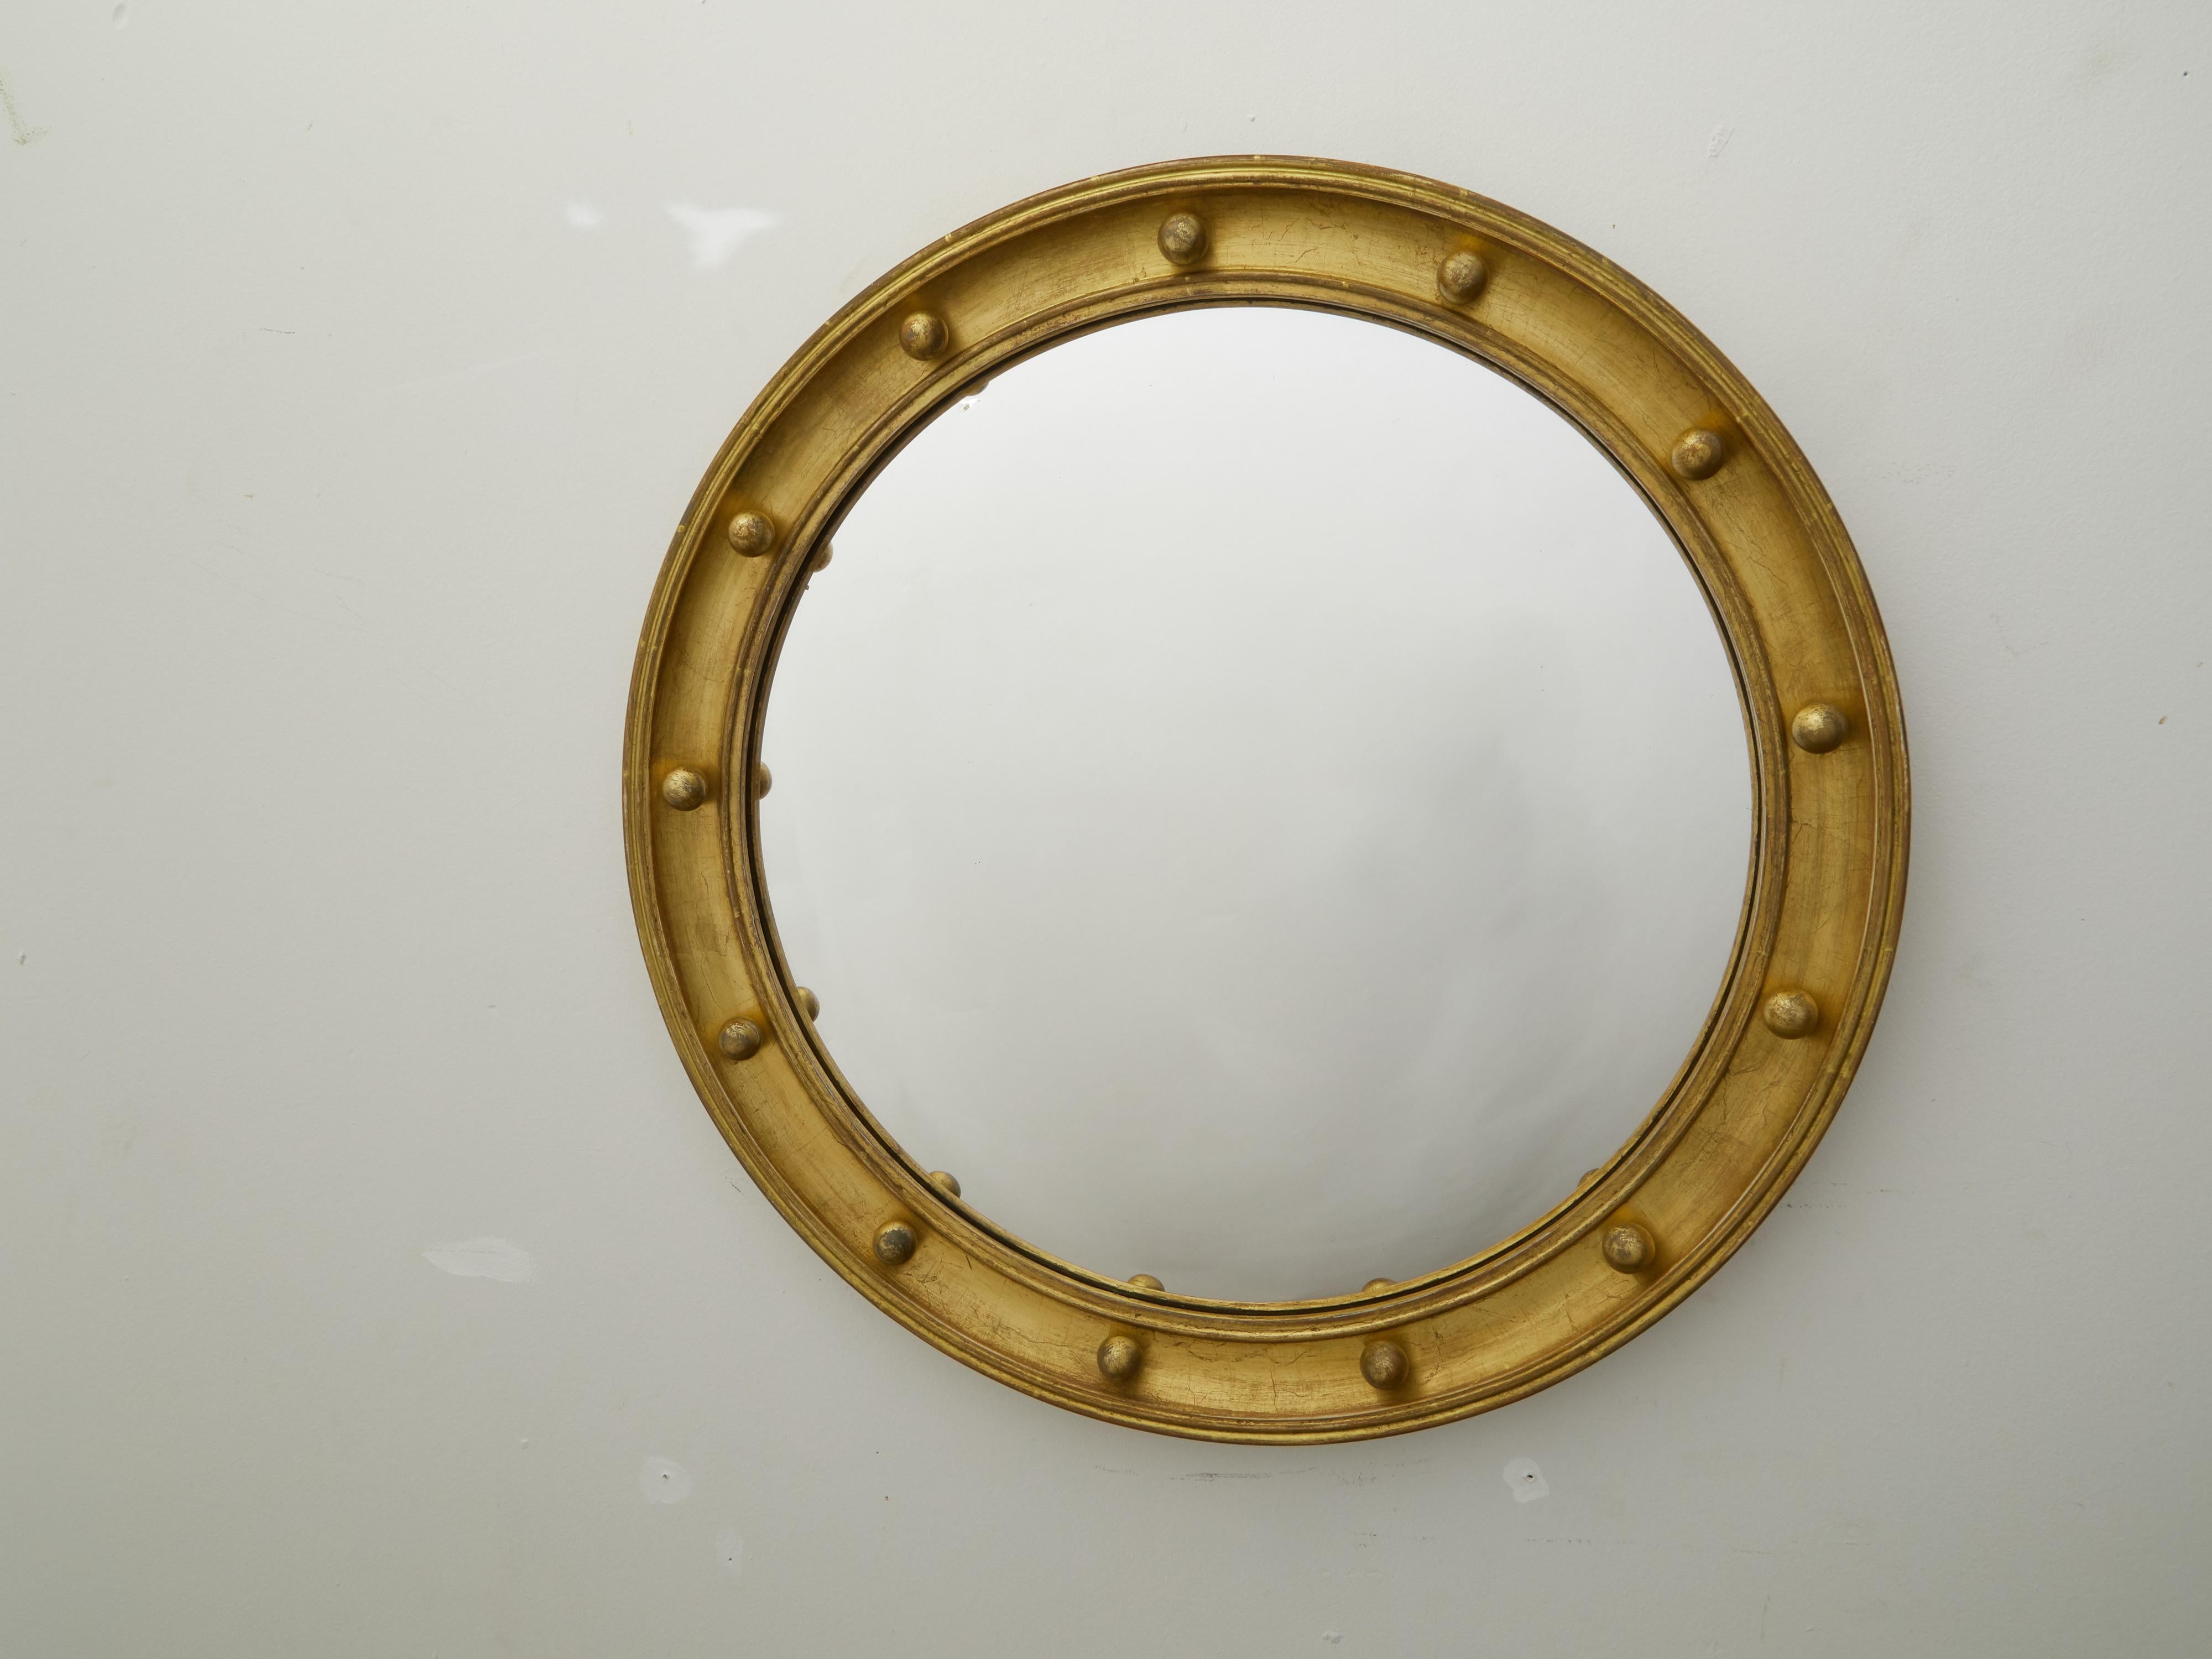 An English giltwood bullseye convex girandole mirror from the early 20th century, with petite spheres. Created in England during the second quarter of the 20th century, this circular mirror features a convex mirror plate surrounded by a gilded frame